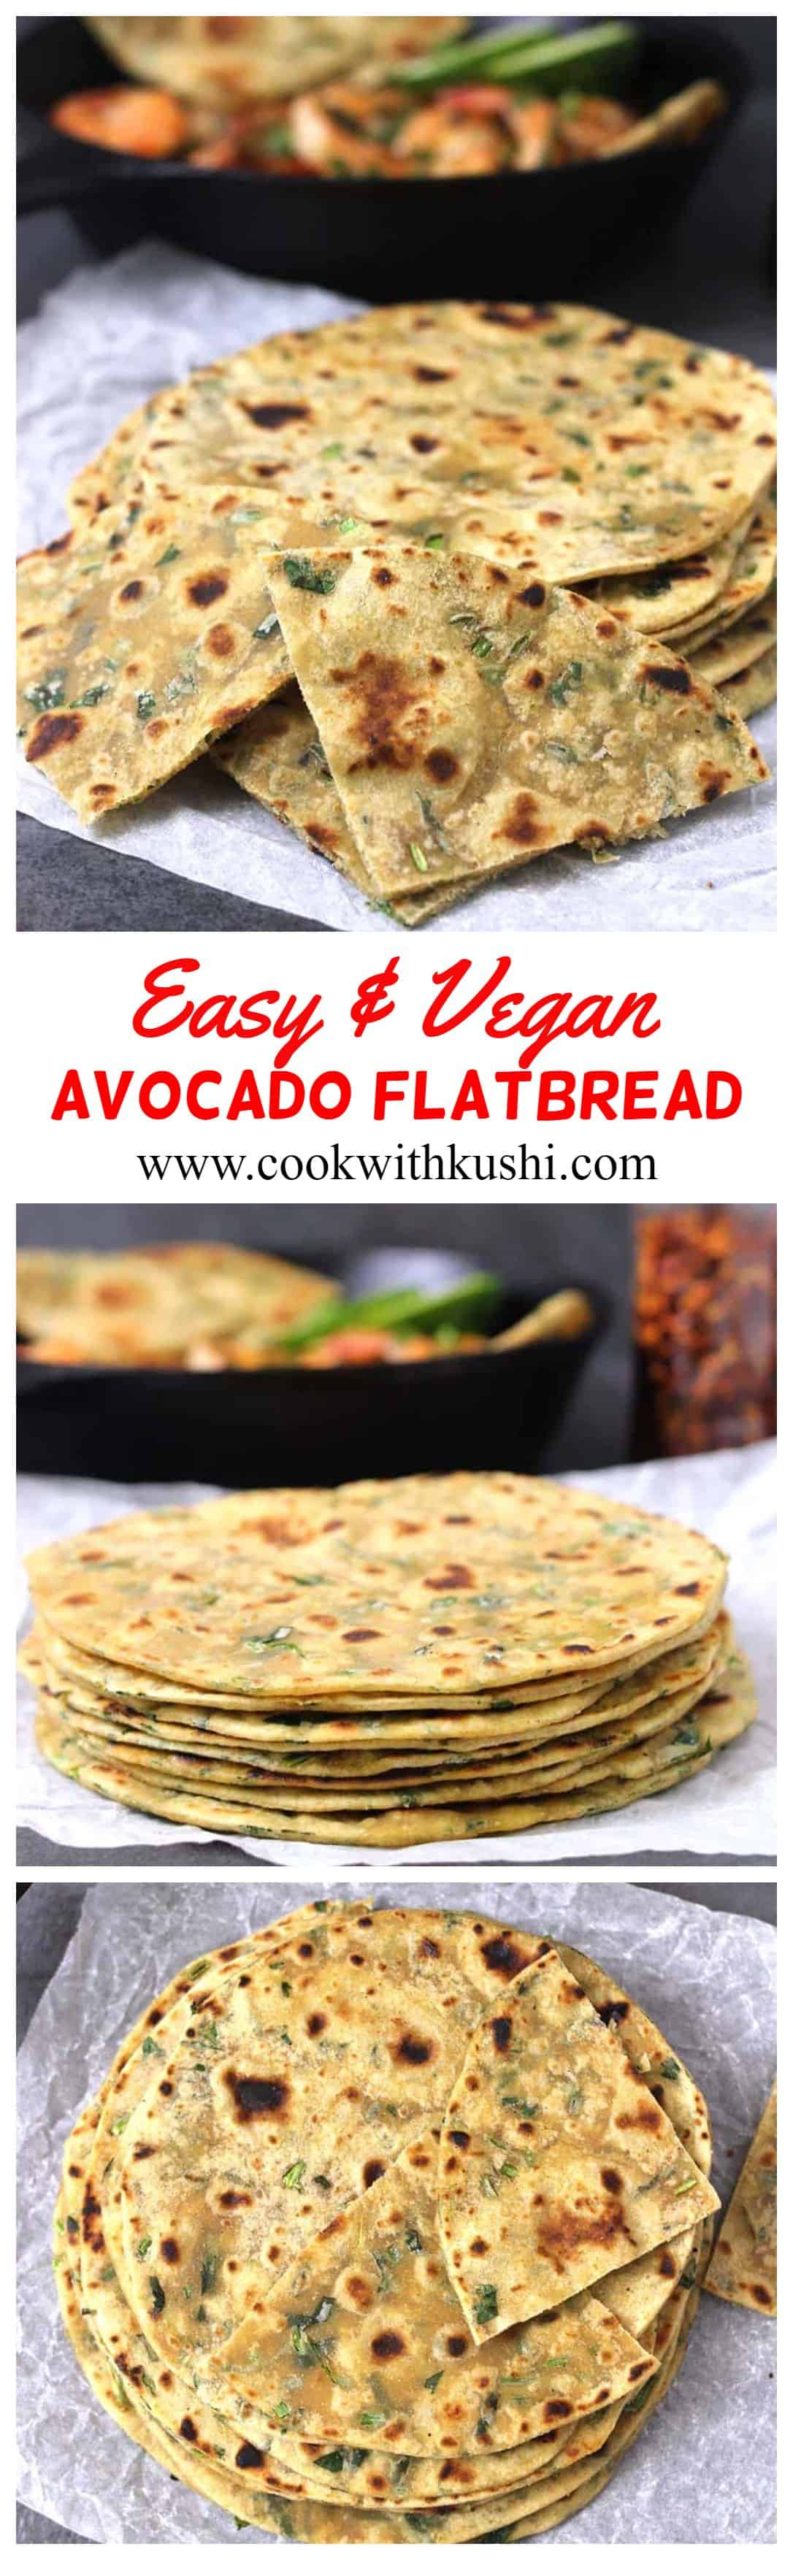 Avocado Flatbread is a super soft and delicious, easy to make oil free vegan bread prepared using 6 ingredients in less than 30 minutes. This is 100 % whole wheat flatbread. #avocadorecipes #avocadobreadtoast #fusionfood #lunchbox #flatbread #veganbread #vegetarianrecipes #indianfood #vegetarianmeal #dinnerrecipes #dinnerideas #dietfood #healthyfood #cleaneating